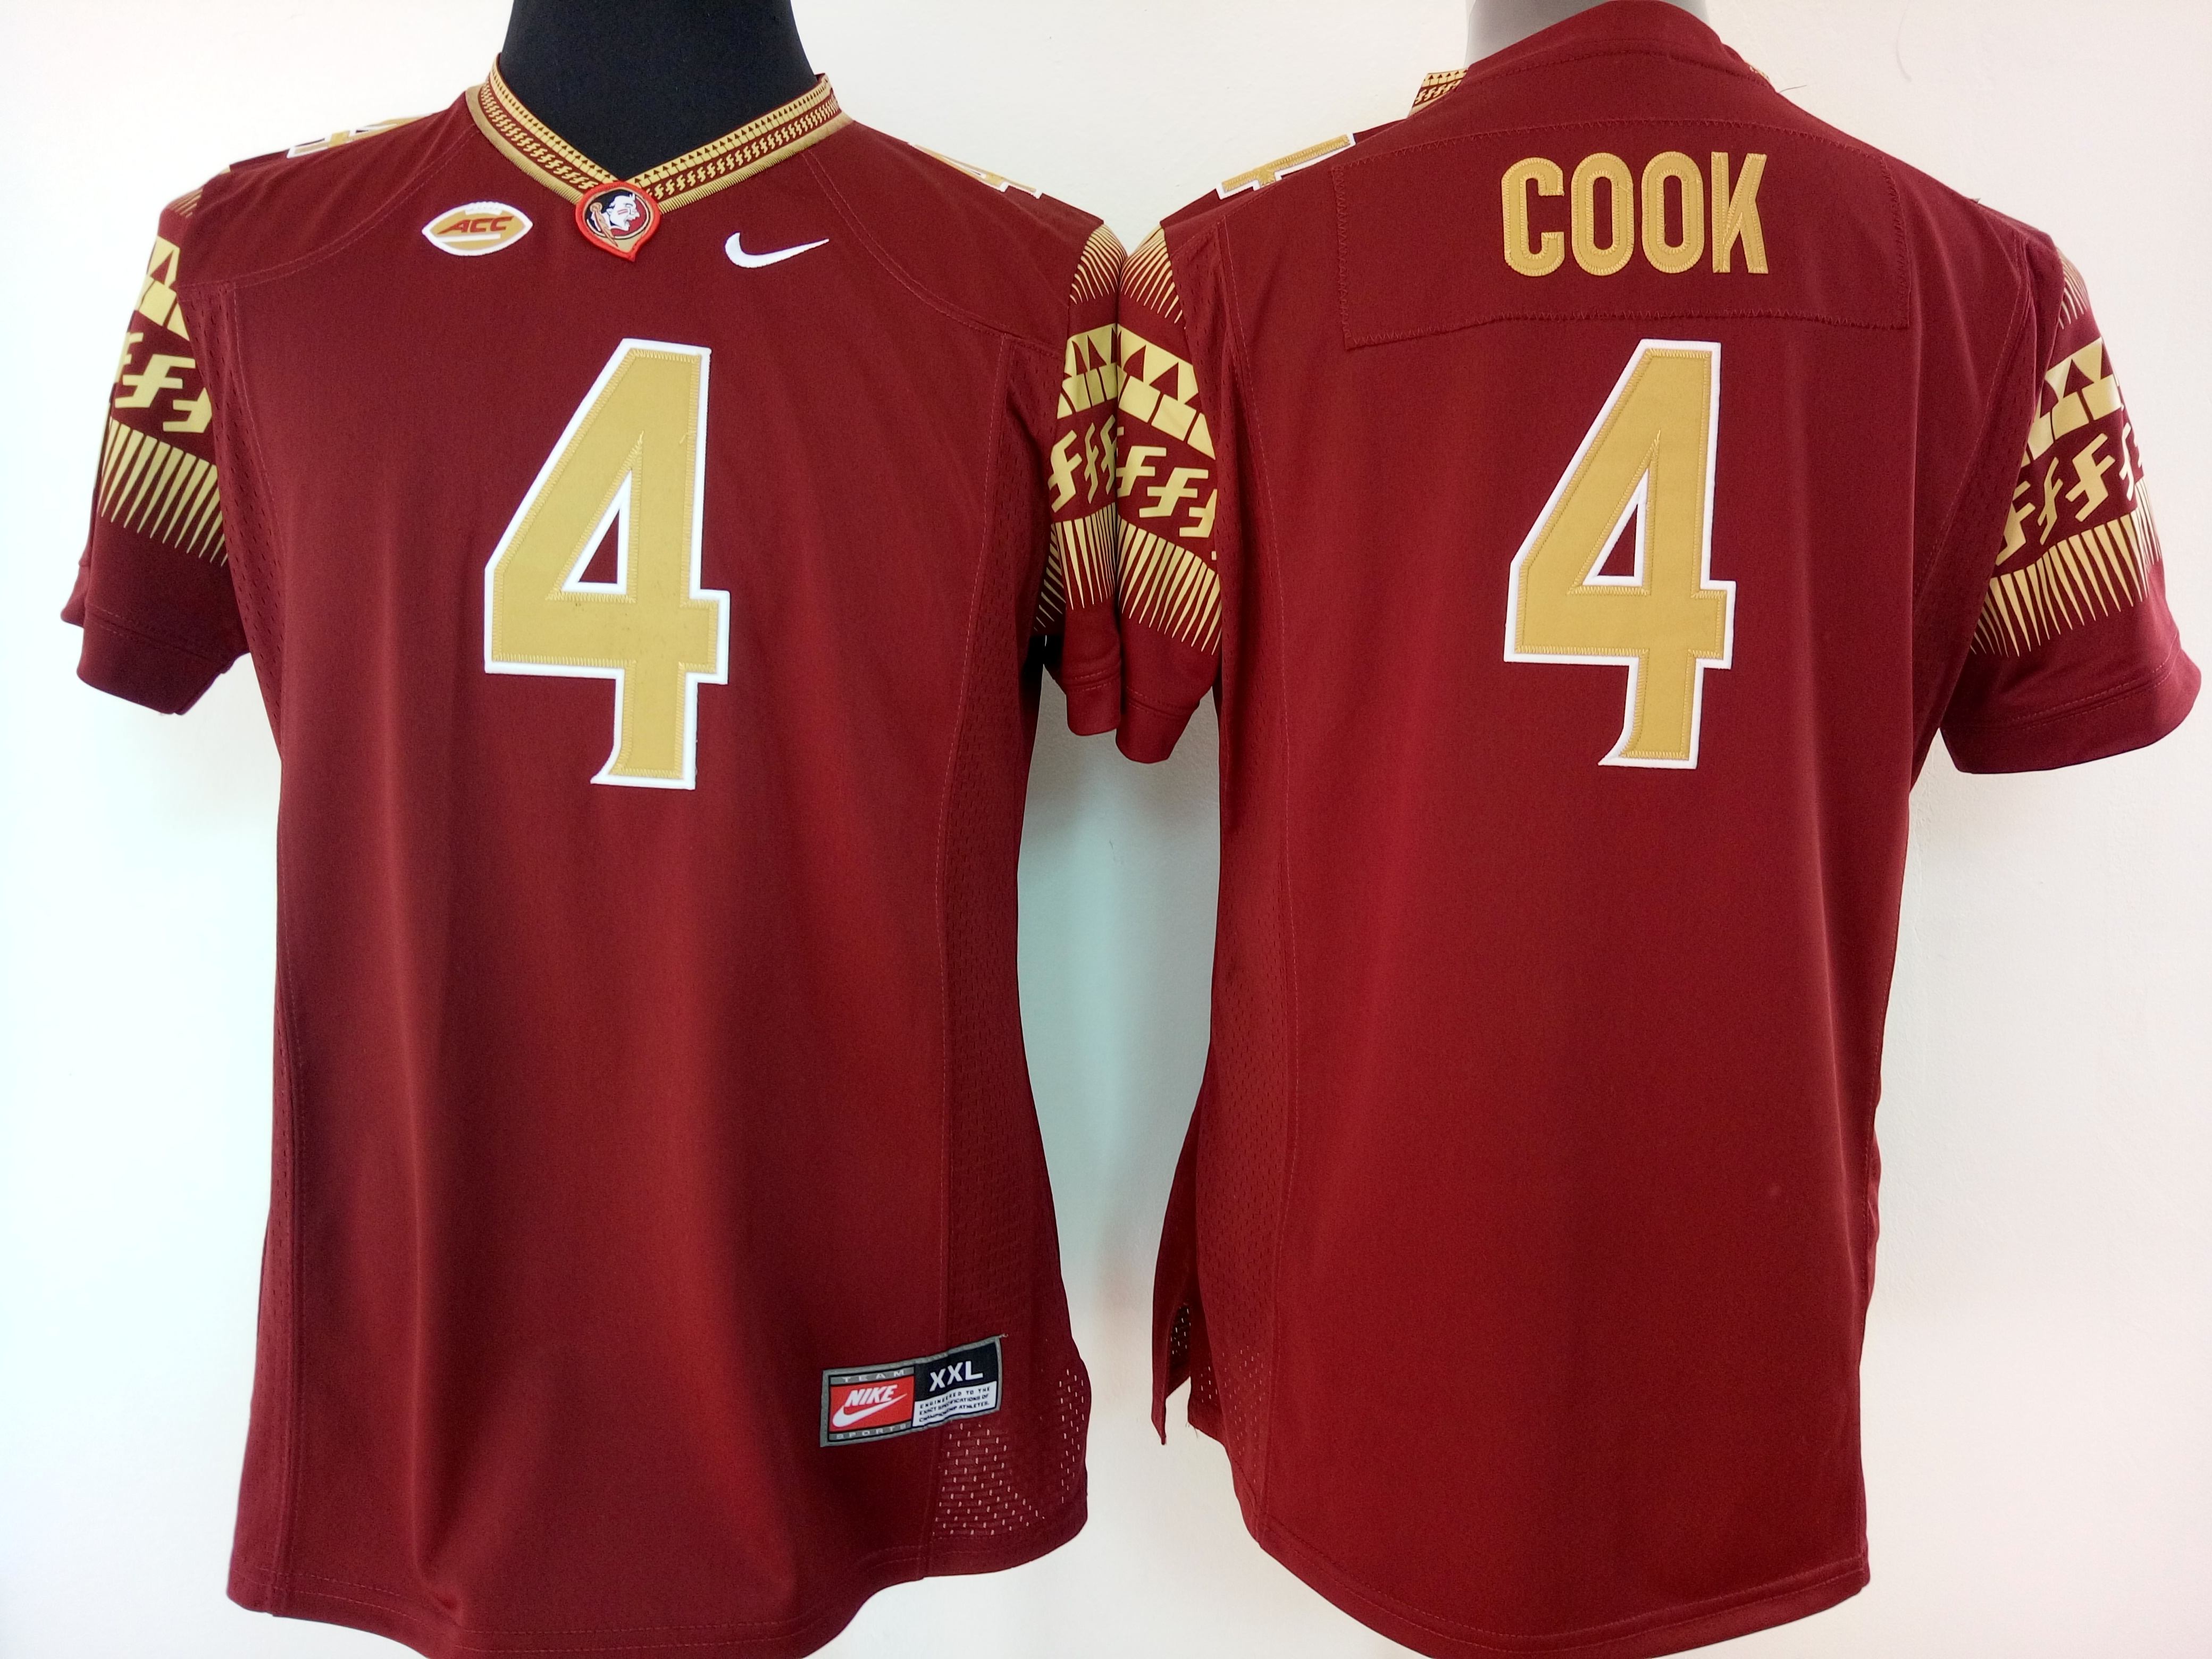 NCAA Womens Florida State Seminoles Red #4 cook jerseys->women ncaa jersey->Women Jersey